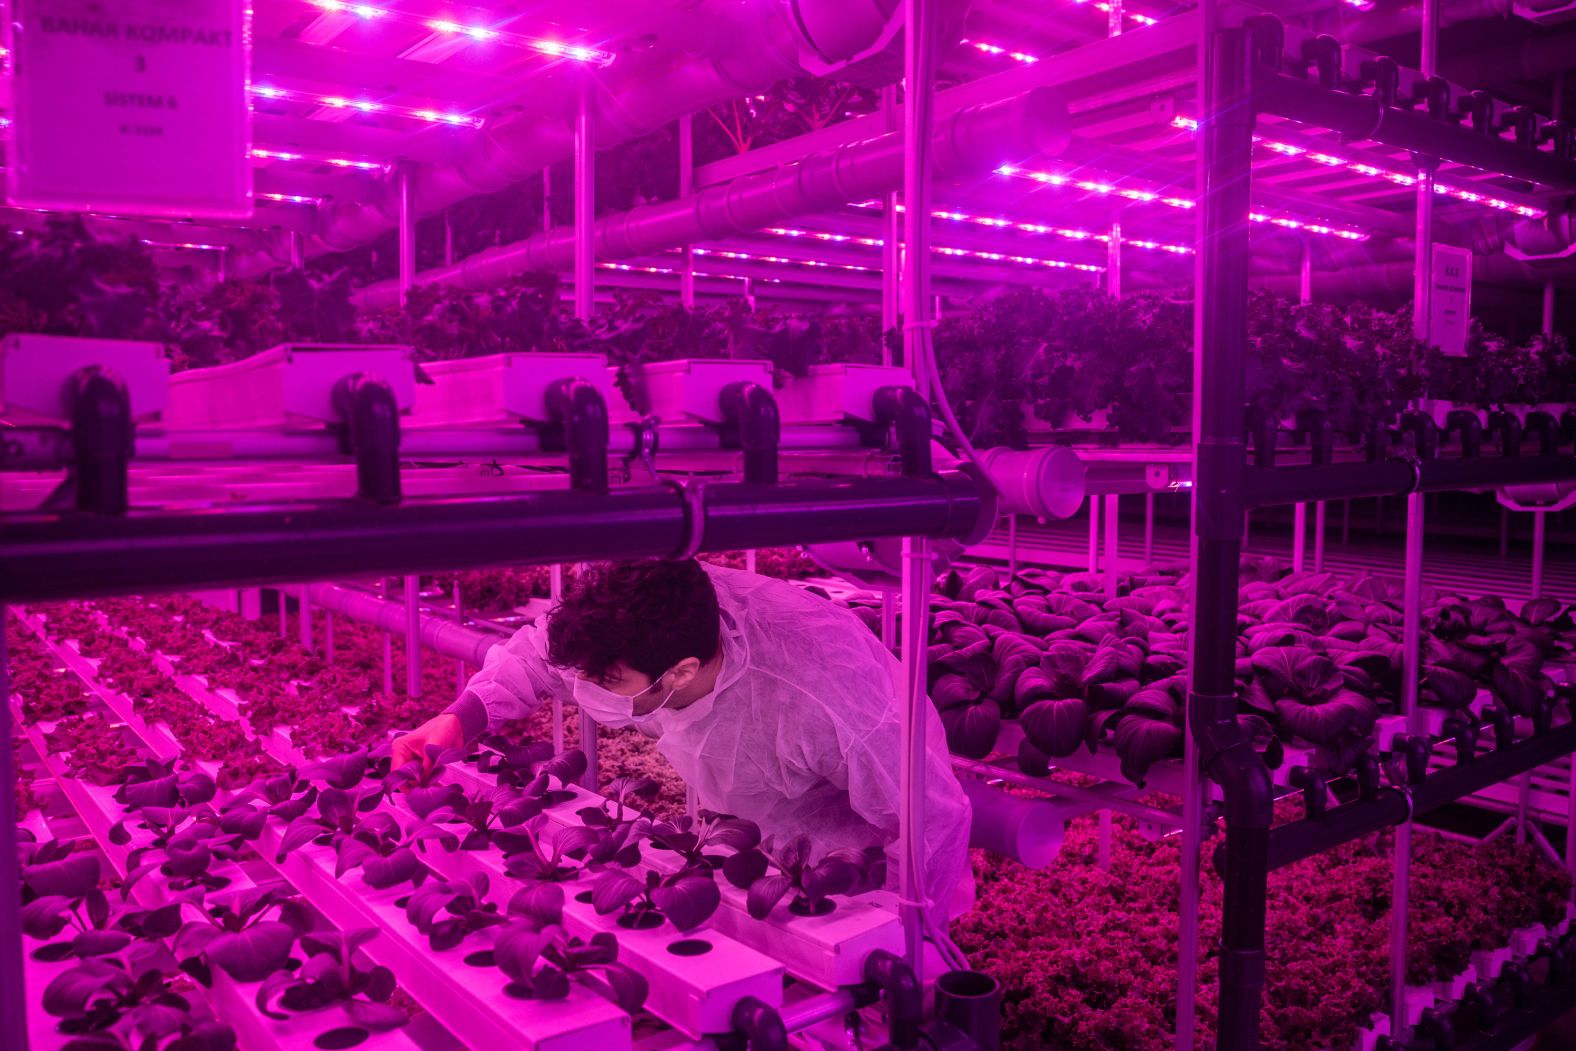 An employee at Plant Factory checks the growth of greens cultivated in a vertical farming system in Istanbul on Wednesday, May 8. Plant Factory is Turkey's first commercial vertical farm. <a href="index.php?page=&url=https%3A%2F%2Fwww.cnn.com%2F2023%2F03%2F24%2Fworld%2Fmars-food-interstellar-lab-climate-scn-spc-intl%2Findex.html" target="_blank">Vertical farming</a> is a method of growing crops without soil in a controlled environment, delivering nutrient-rich water straight to a plant's roots. It can use significantly less water and fertilizer than traditional outdoor agriculture, and by continuously recirculating water, it creates very little waste.